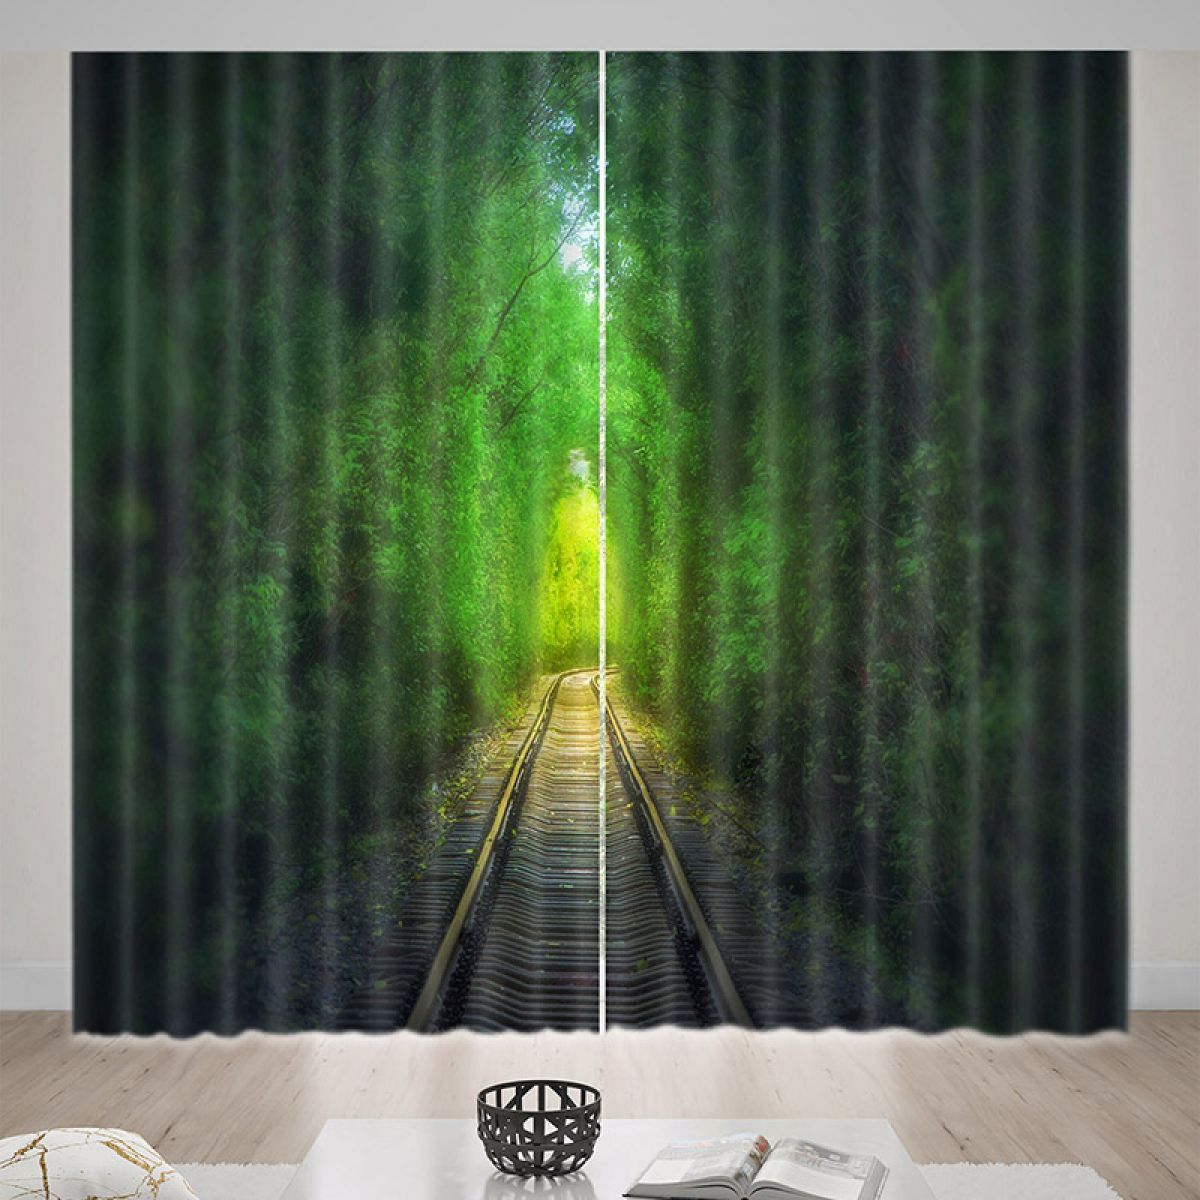 3d Railway Through The Forest Printed Window Curtain Home Decor